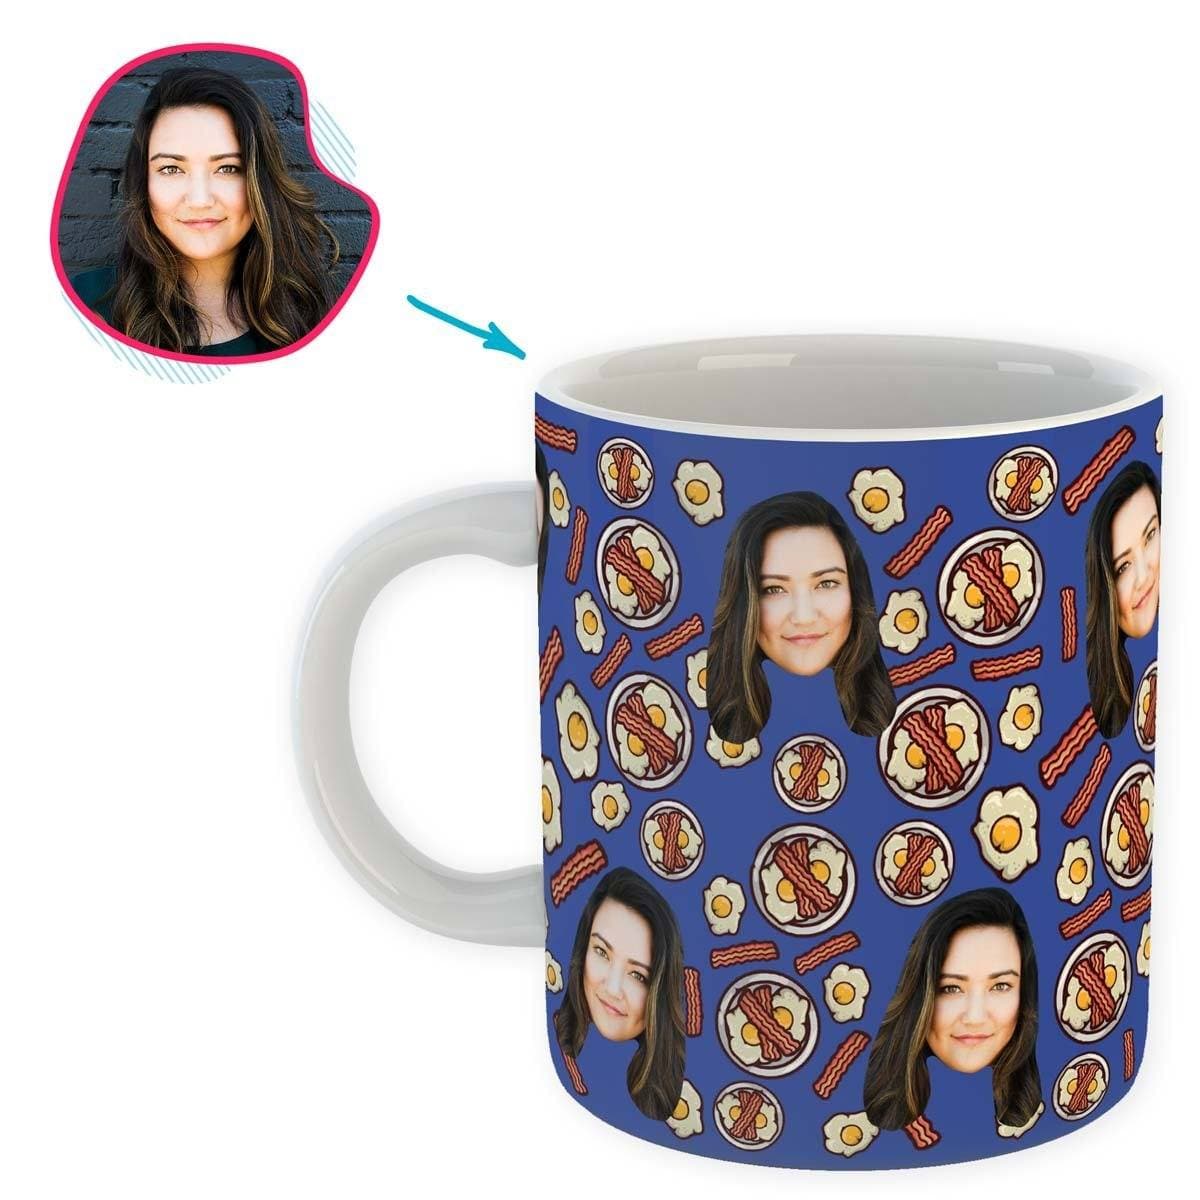 darkblue Bacon and Eggs mug personalized with photo of face printed on it